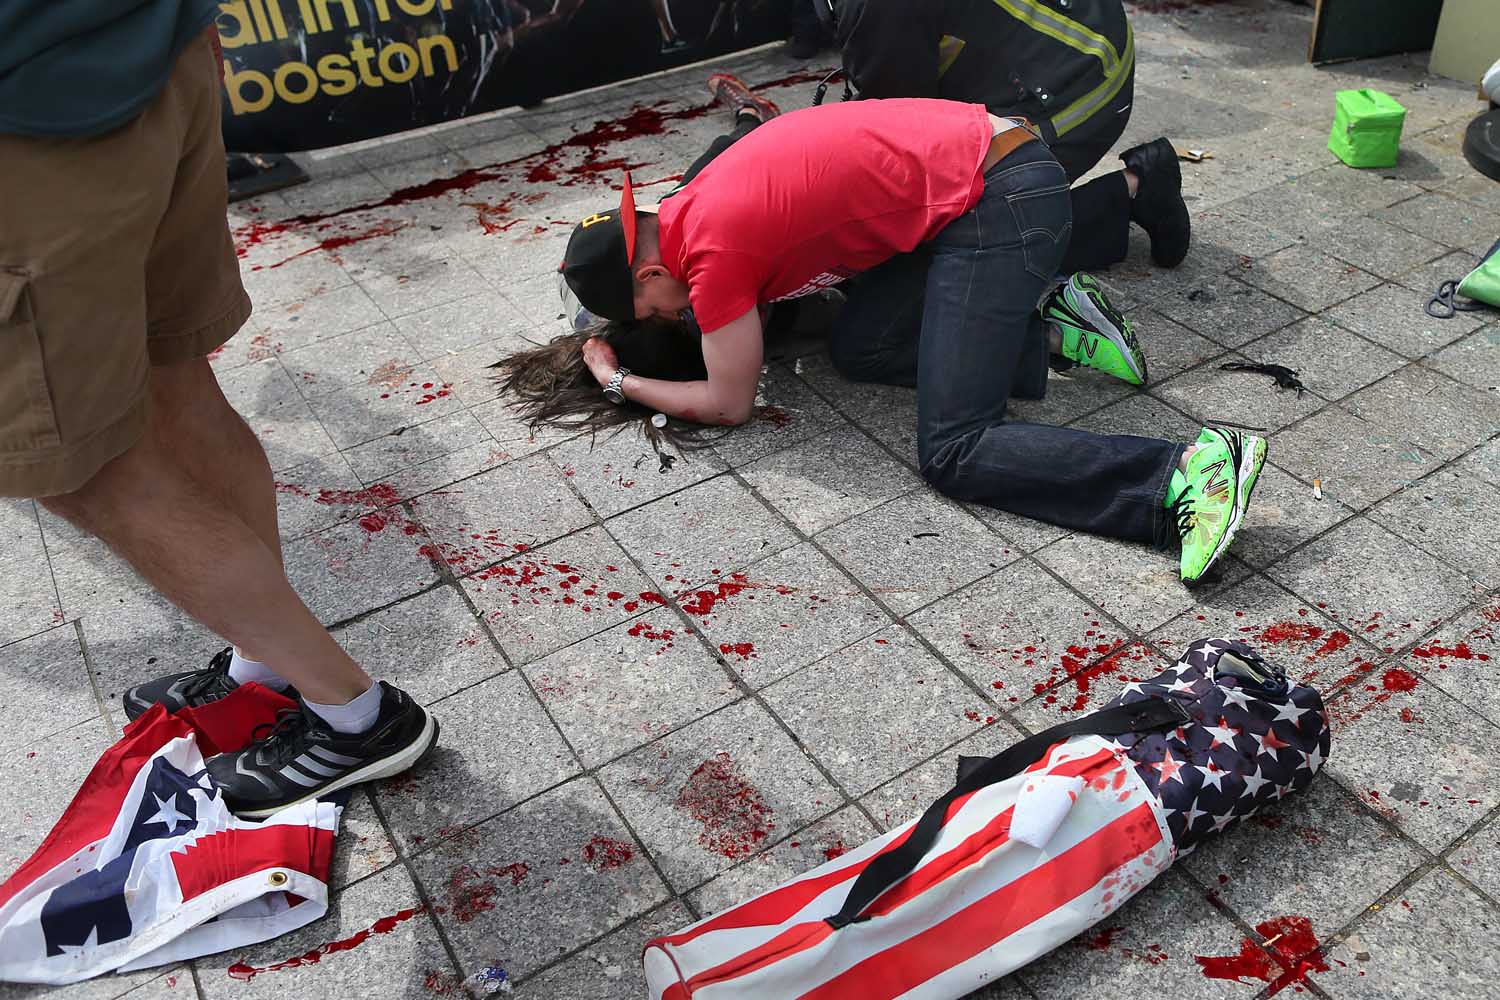 April 15, 2013. A man comforts a victim on the sidewalk at the scene of the first explosion near the finish line of the 117th Boston Marathon.